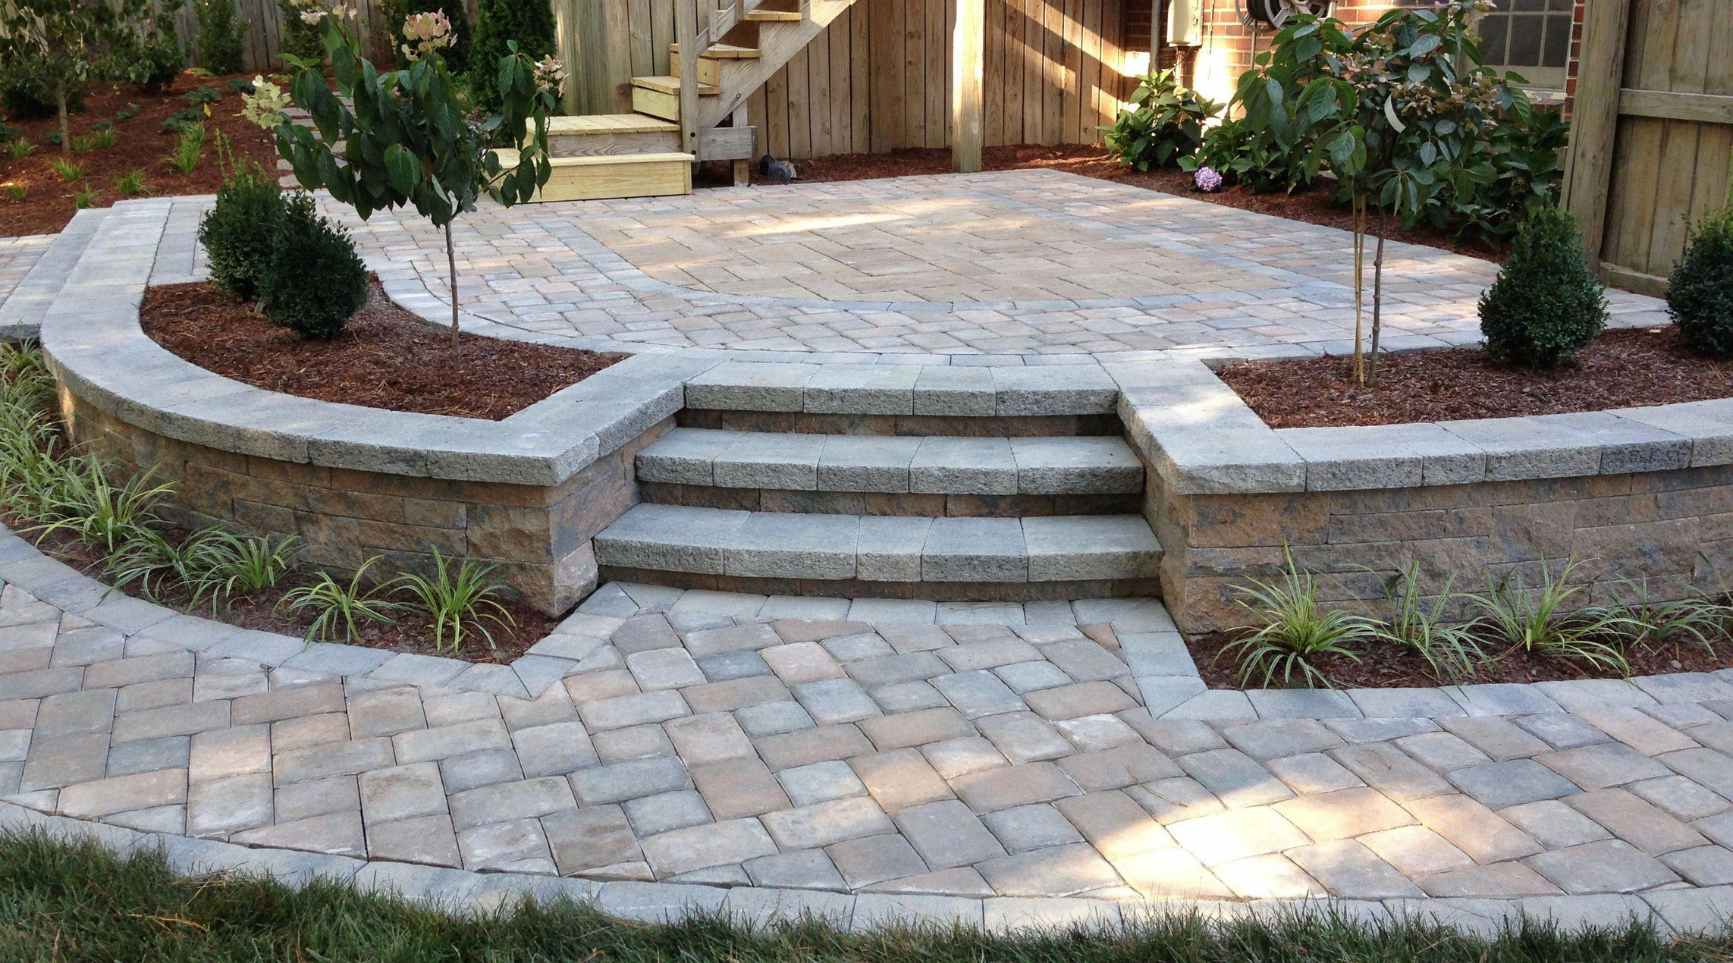 How To Make A Patio With Brick Pavers